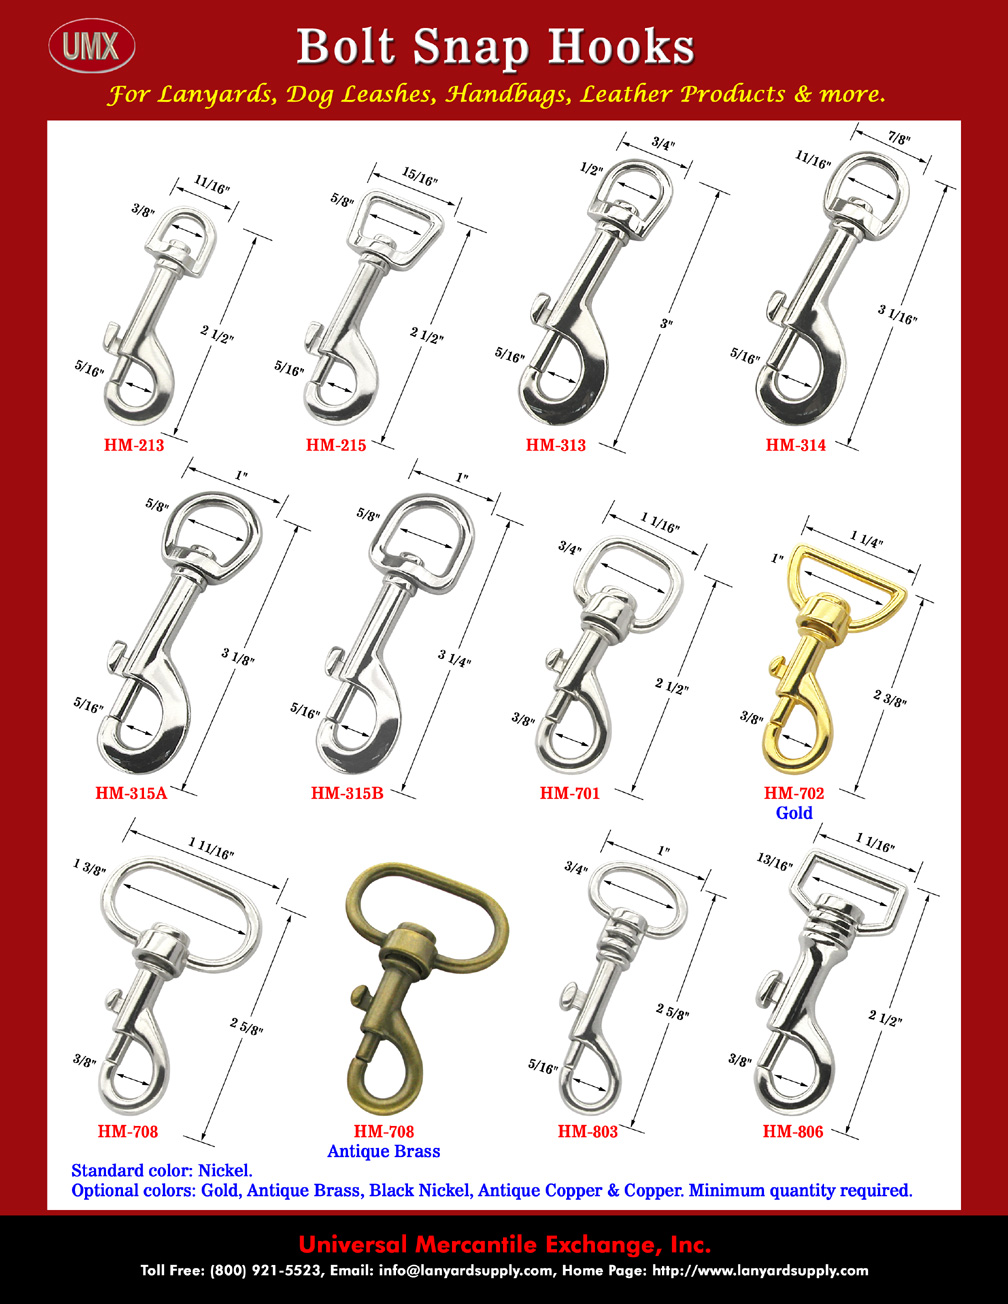 Popular Medium Size Bolt Snaps with Round Push Bar For Ropes or Straps.